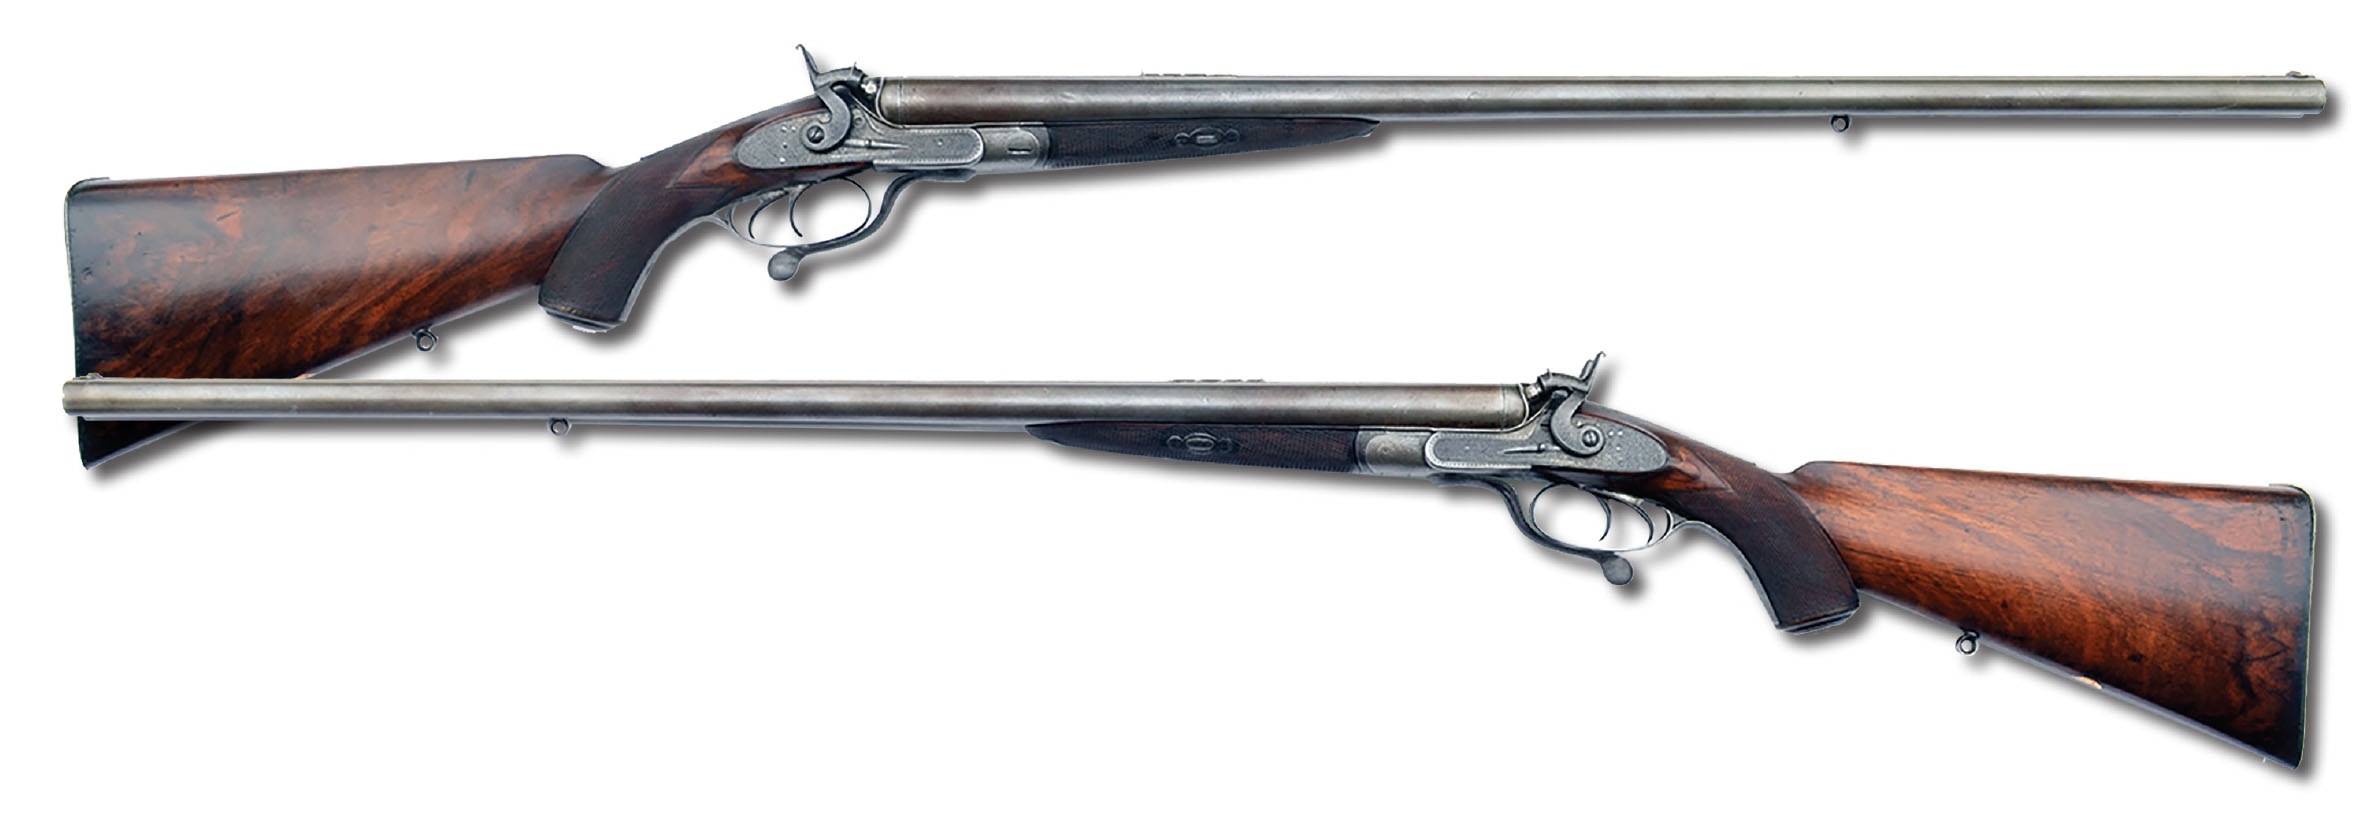 The Braddell has elegant lines. Its profile, especially the buttstock and pistol grip, are typical of fine Scottish makers like Alexander Henry or Daniel Fraser.